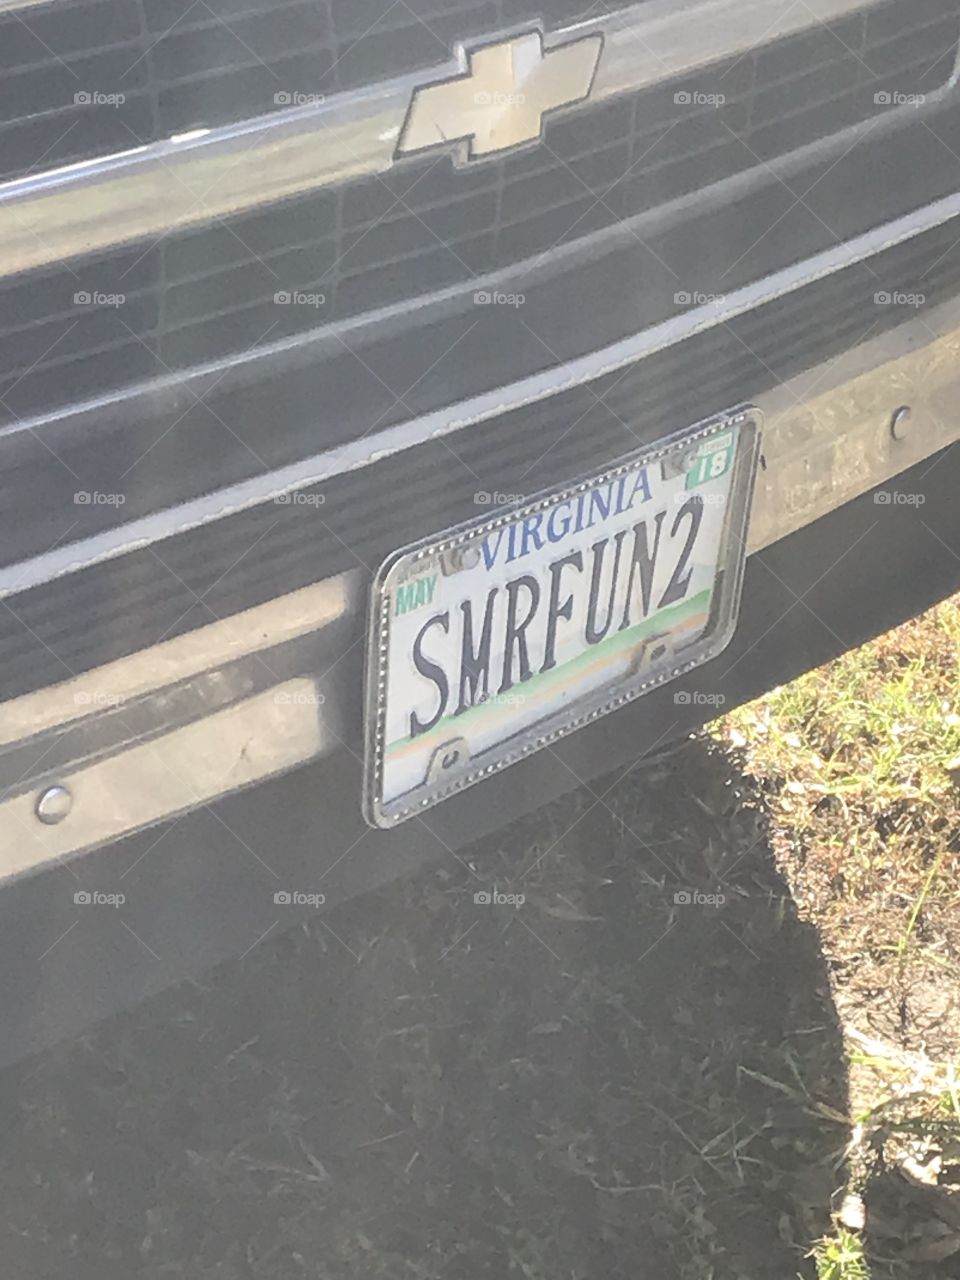 Funny license plate